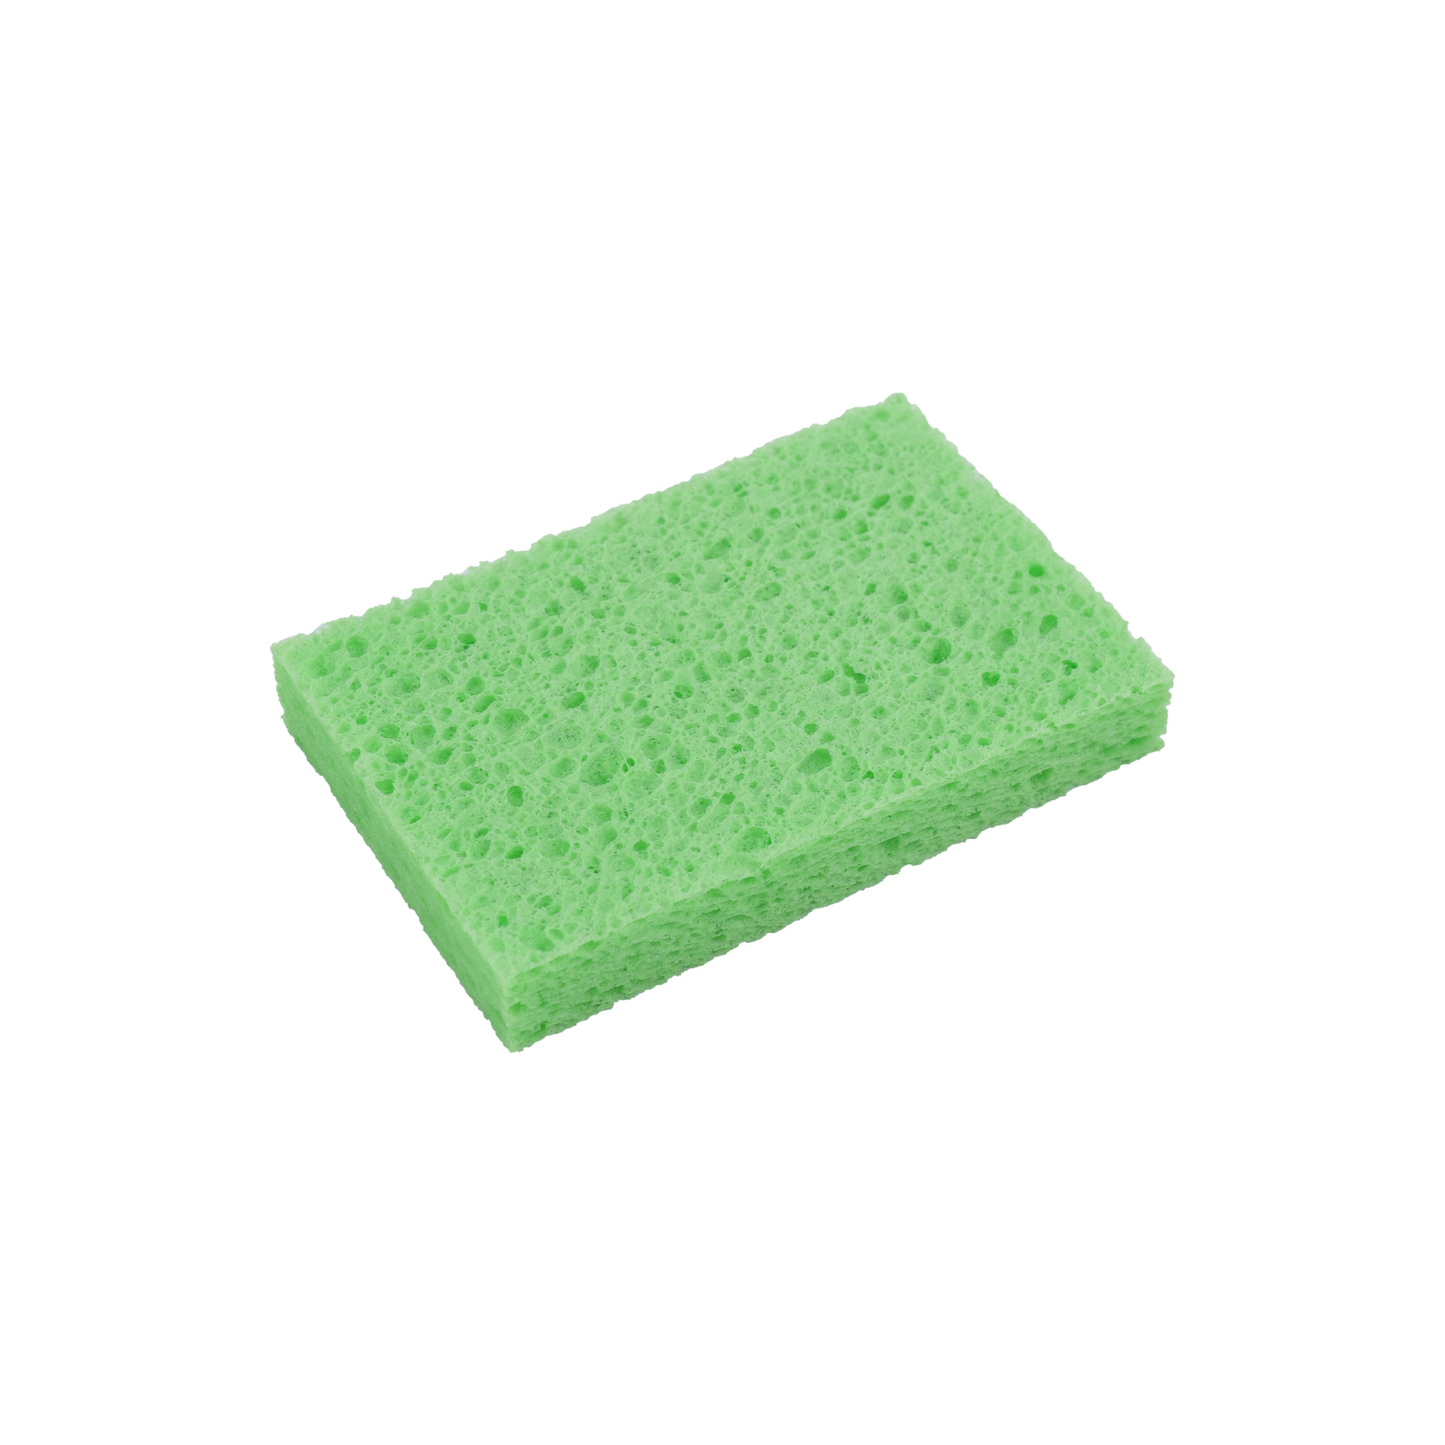 Reusable Cellulose Cleaning Sponges